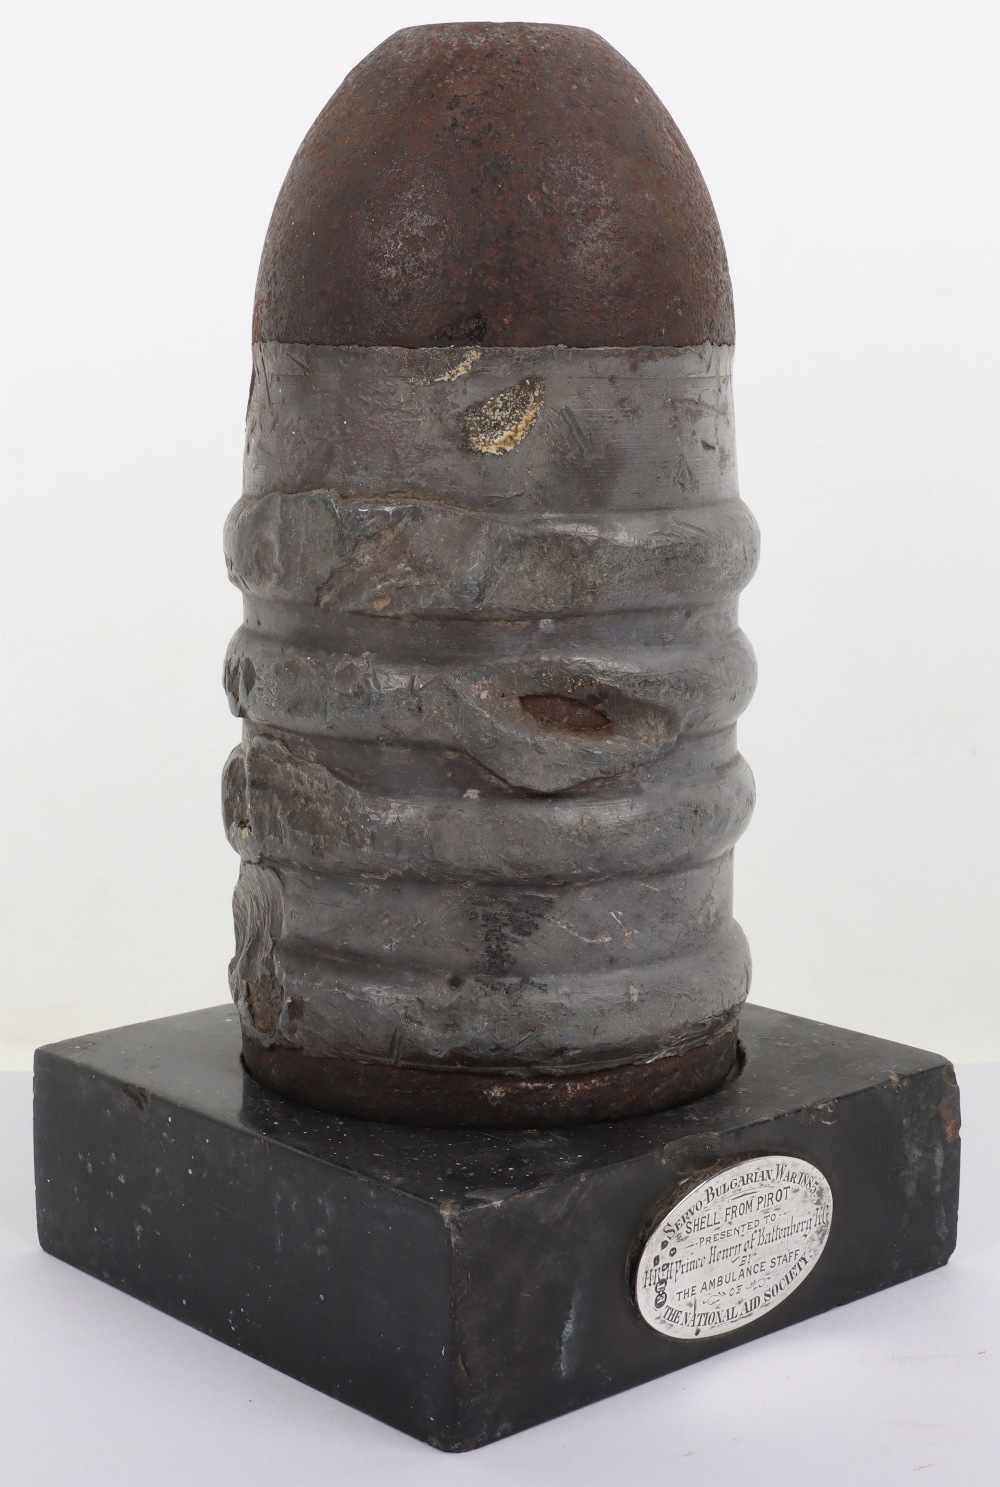 Artillery Shell Head from the Battle of Pirot During the Servo-Bulgarian War 1885 Presented to H.R.H - Image 3 of 8